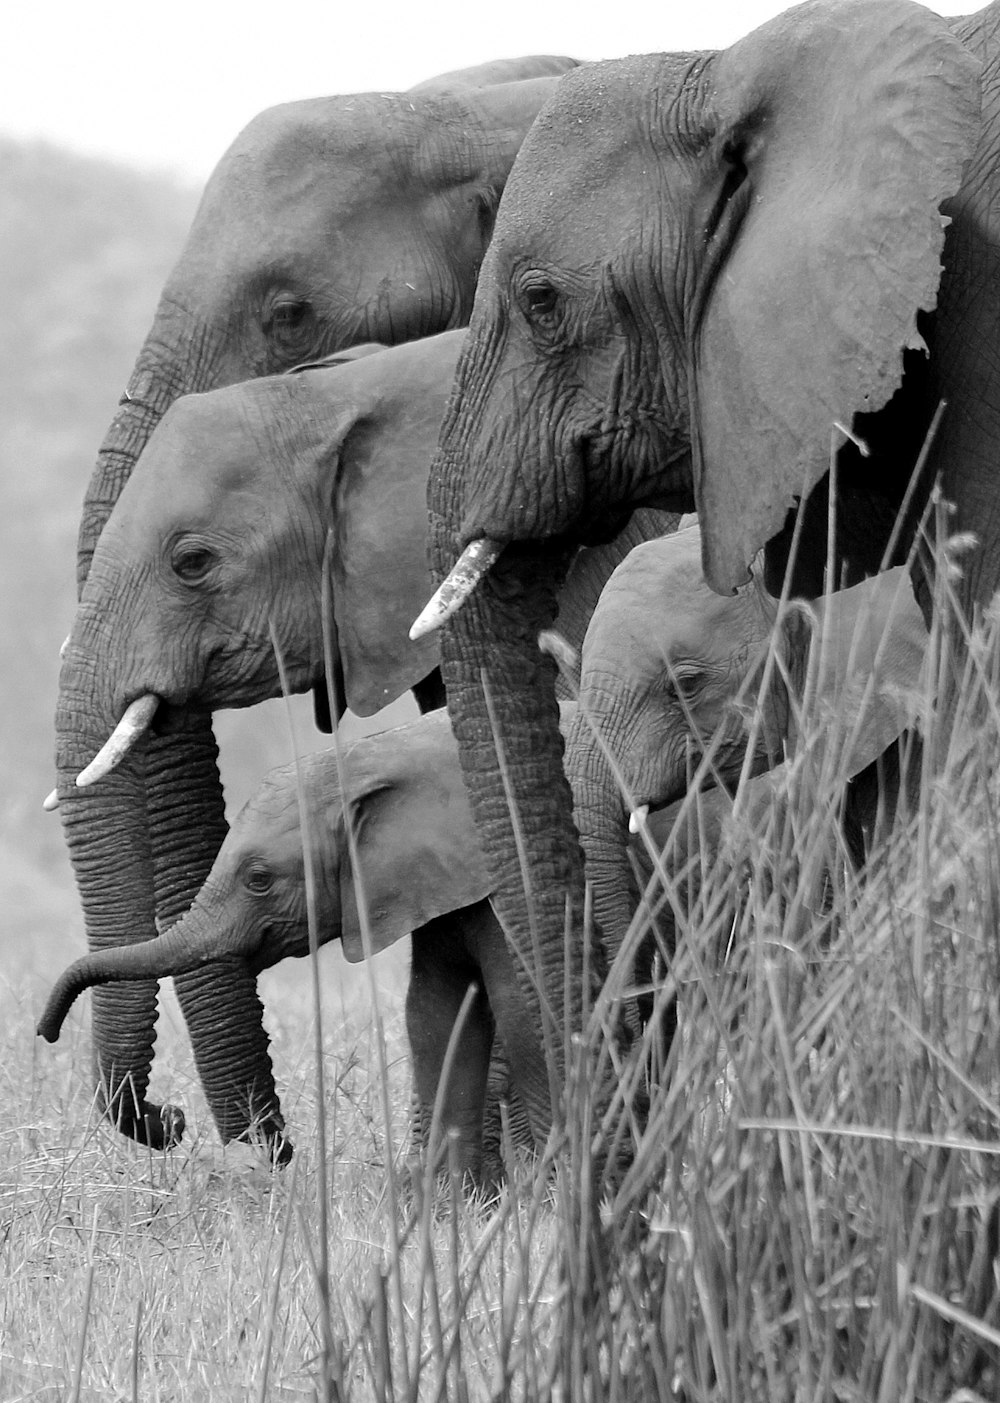 a group of elephants stand in a grassy field